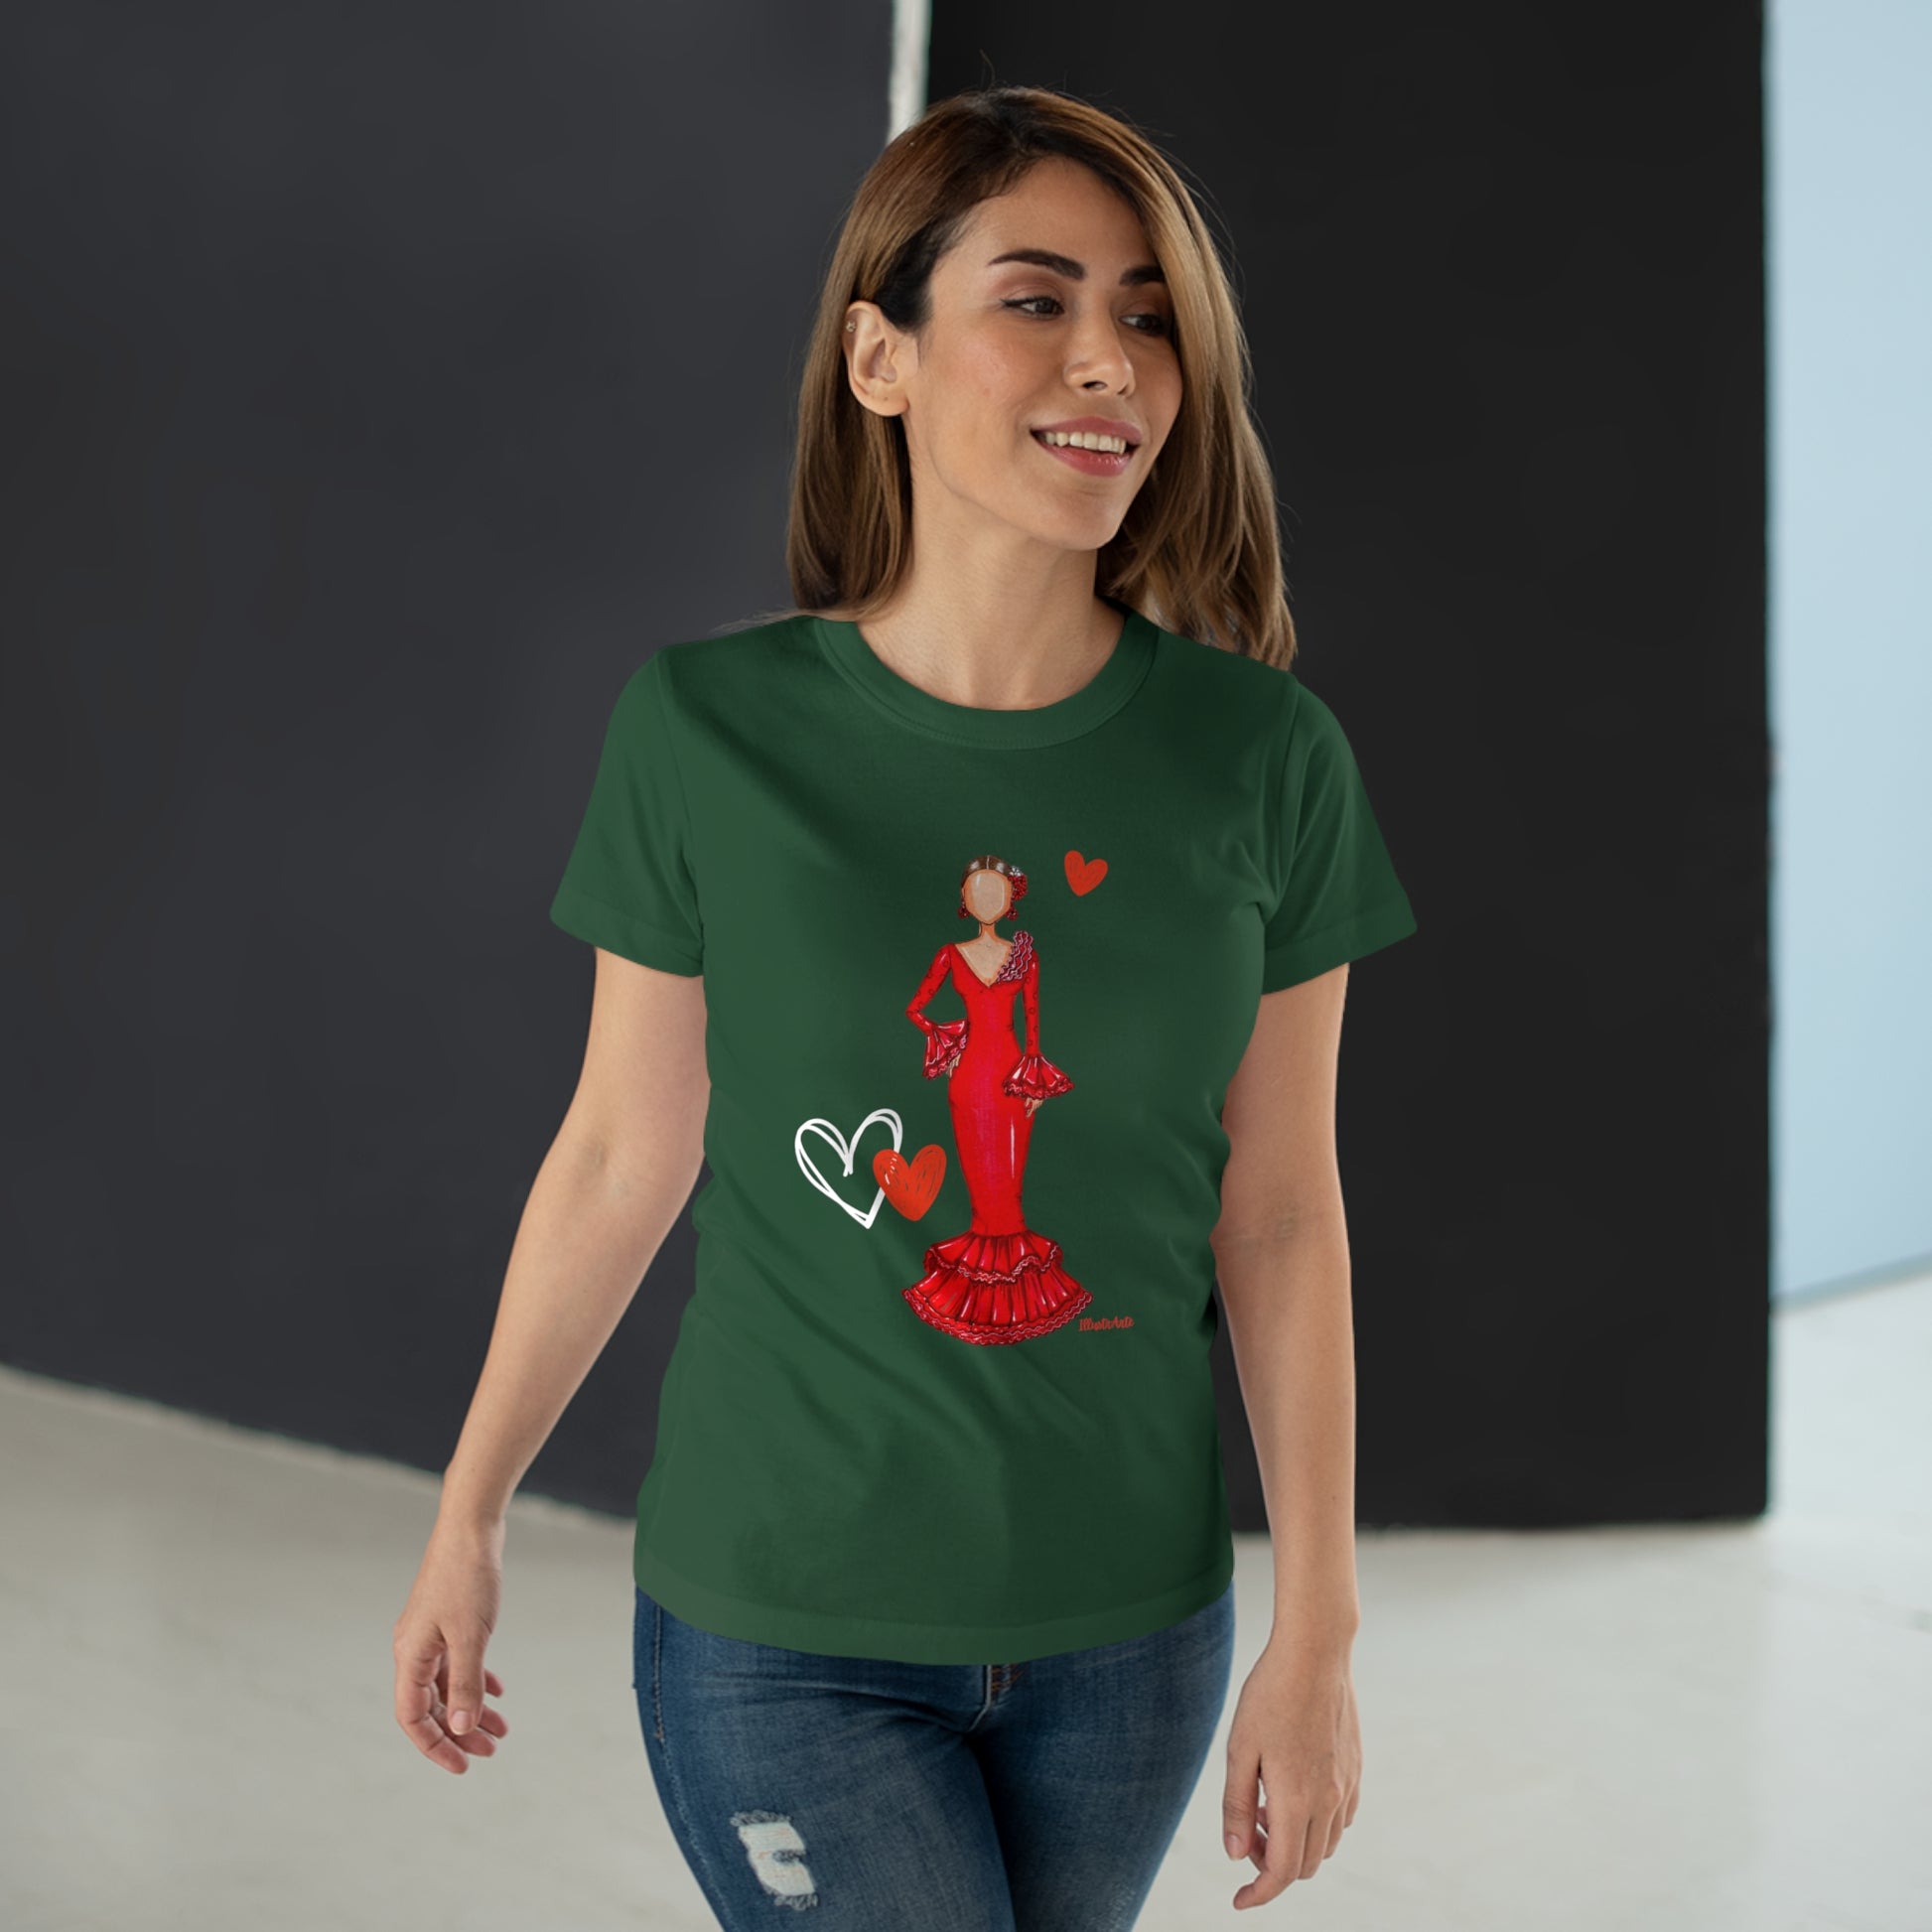 a woman wearing a green t - shirt with a red dress